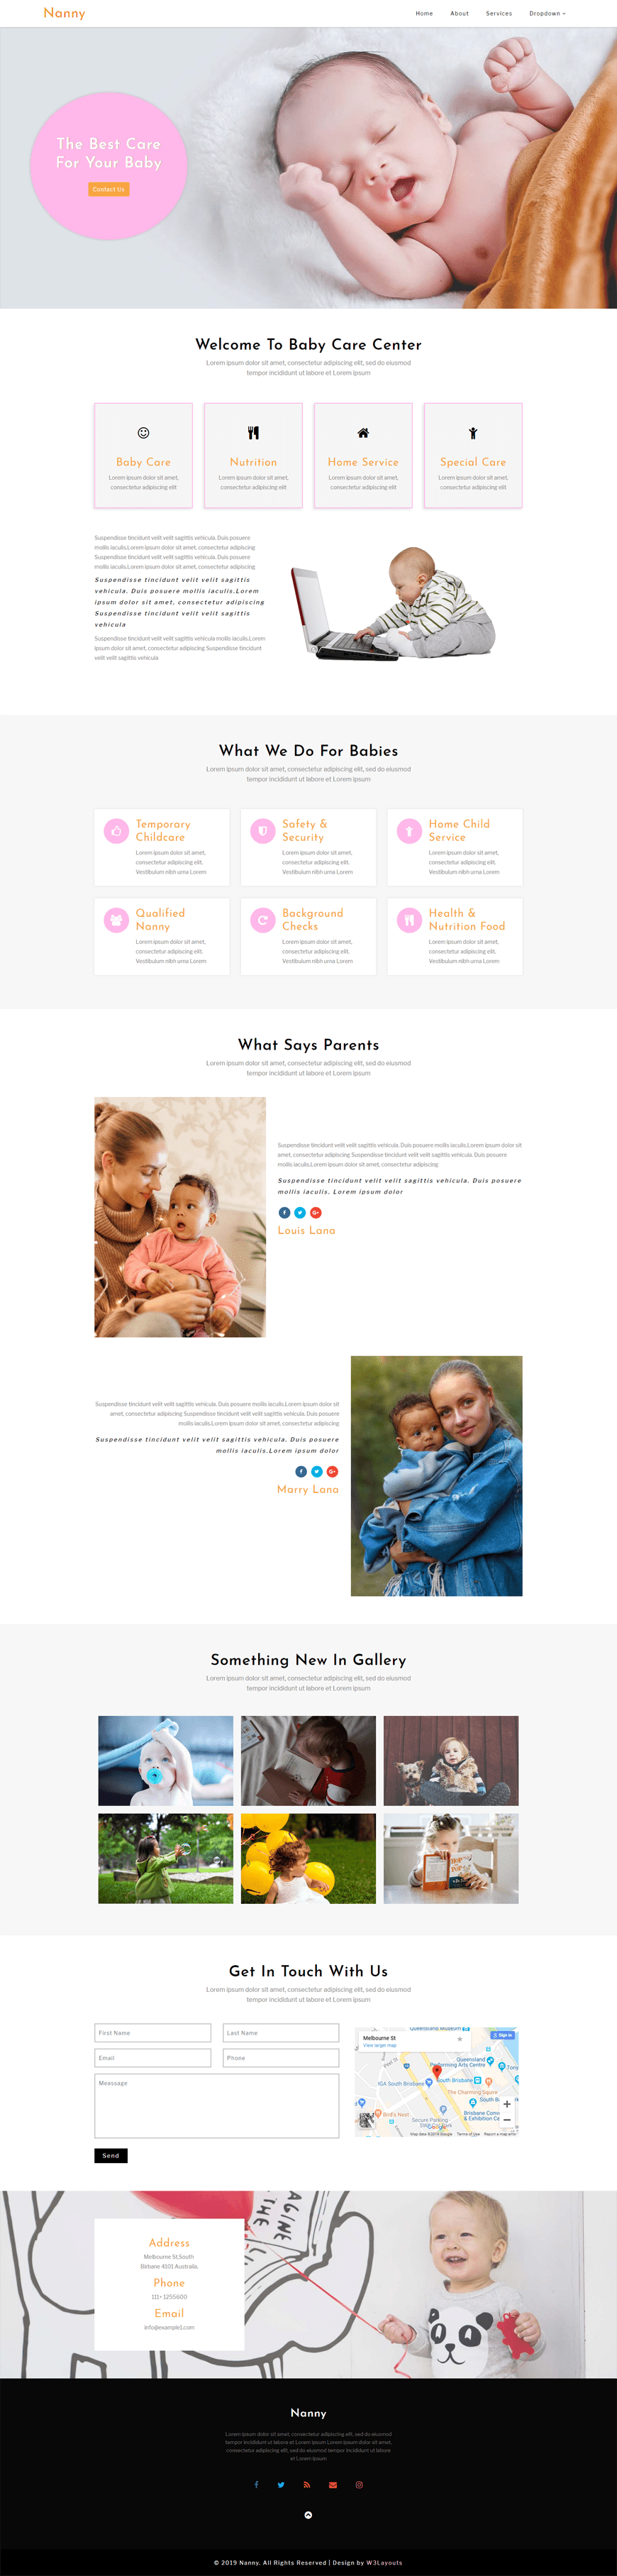 Nanny, a Society & People category website template designed for child care websites.